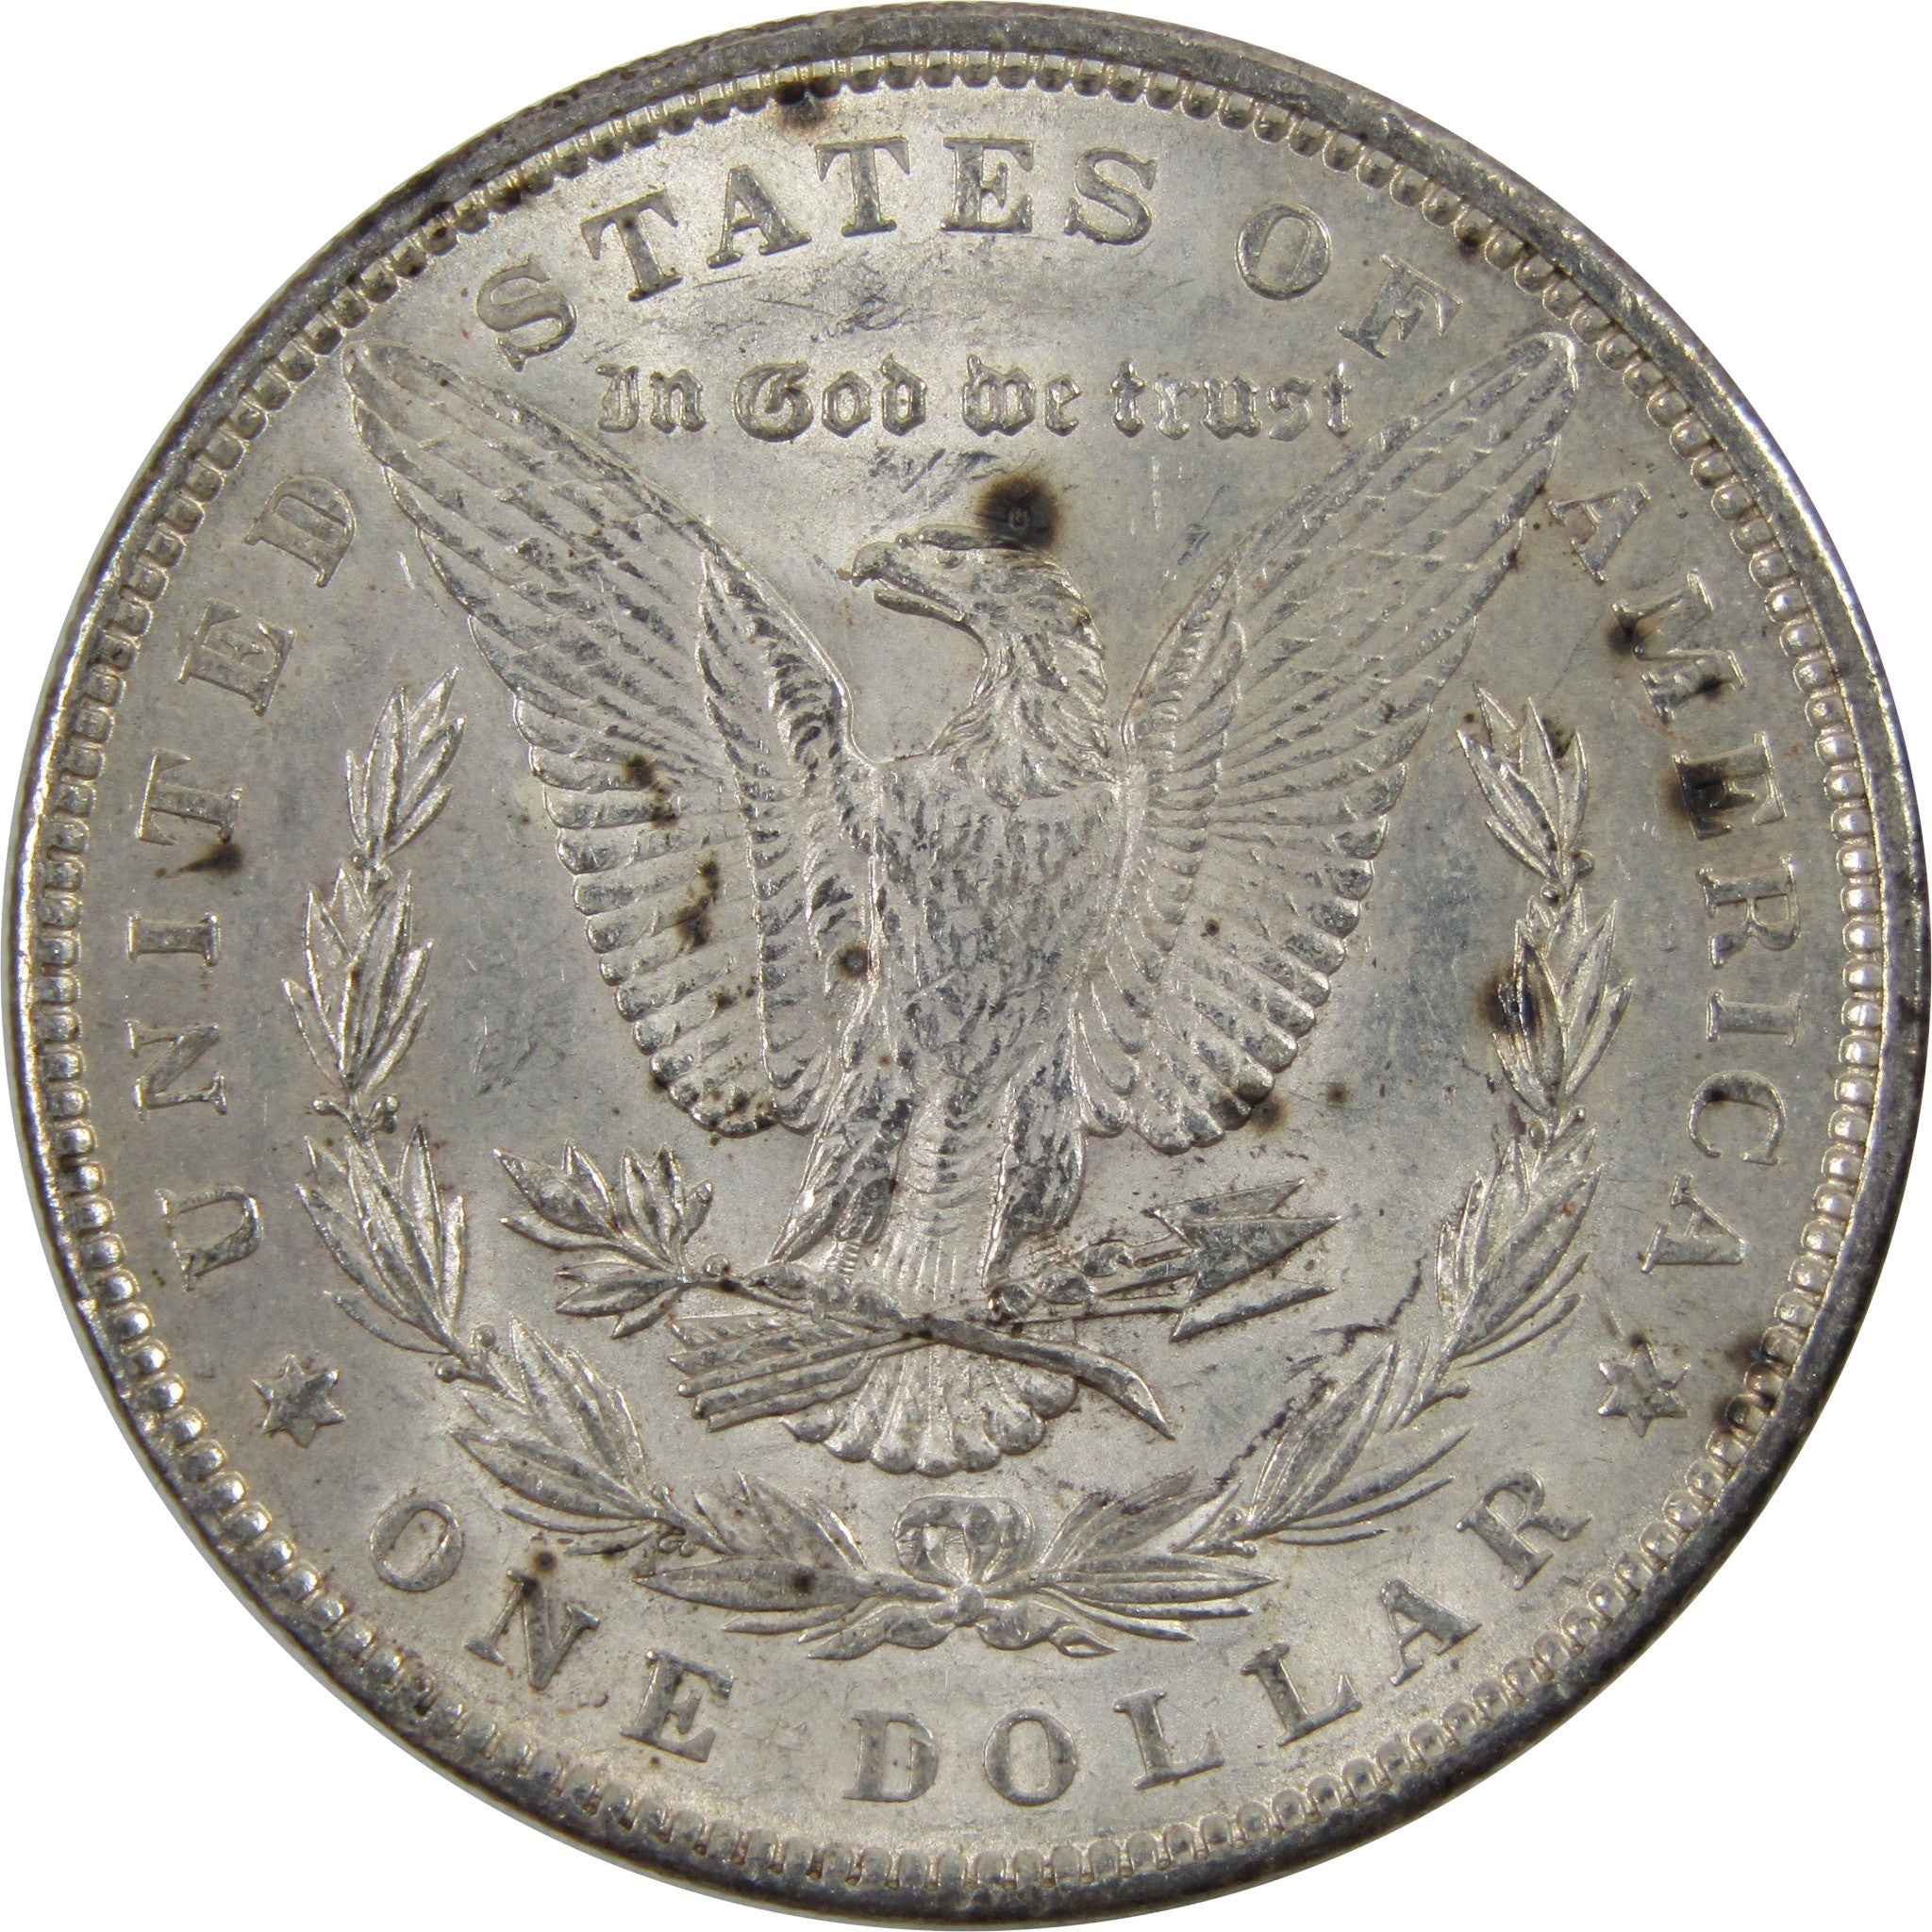 1889 Morgan Dollar AU About Uncirculated 90% Silver $1 Coin SKU:I5506 - Morgan coin - Morgan silver dollar - Morgan silver dollar for sale - Profile Coins &amp; Collectibles